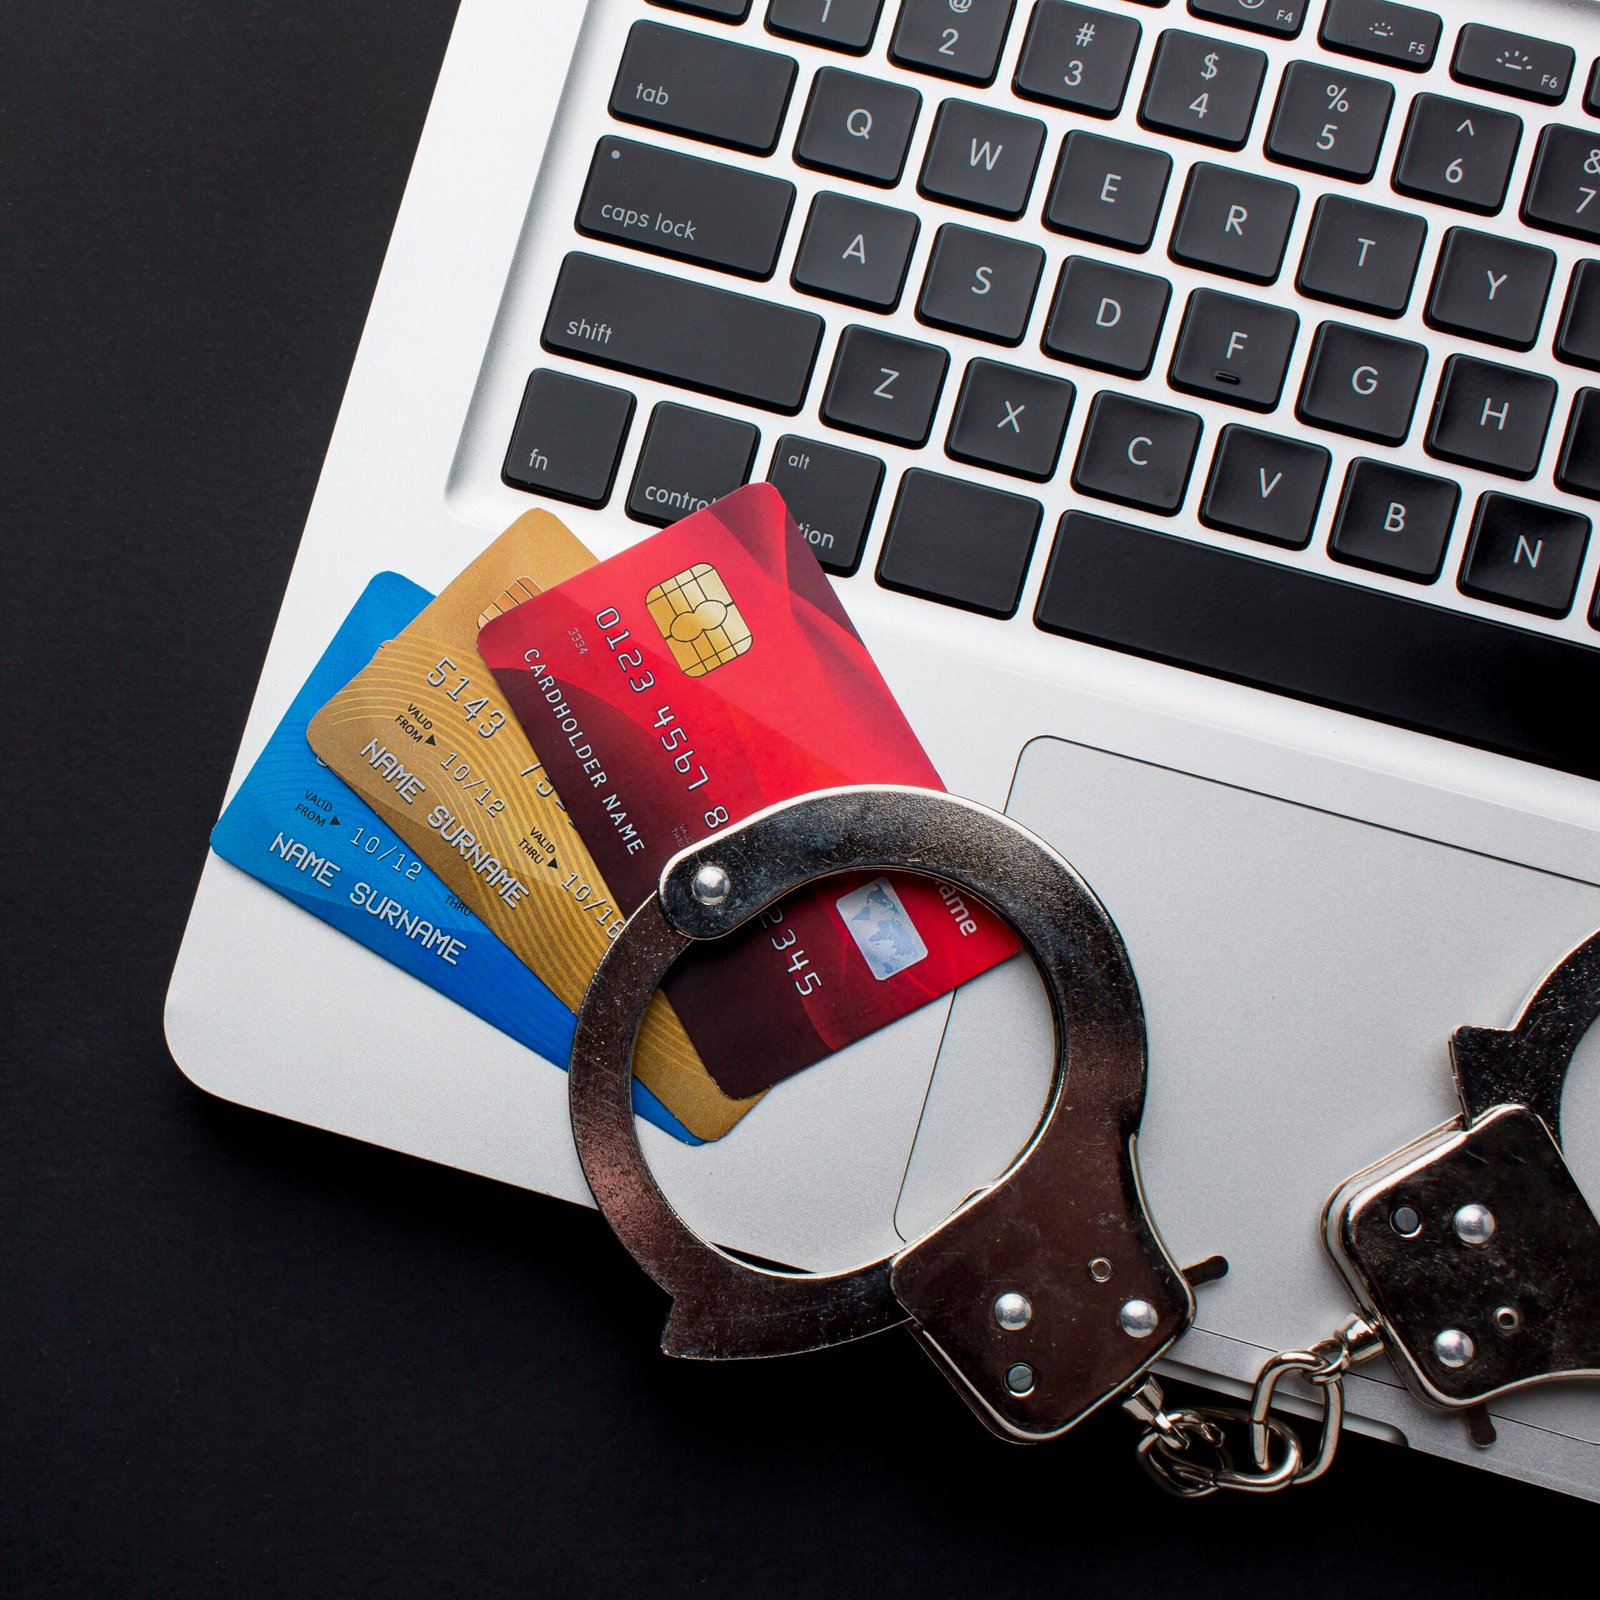 Laptop With Credit Cards and Handcuffs